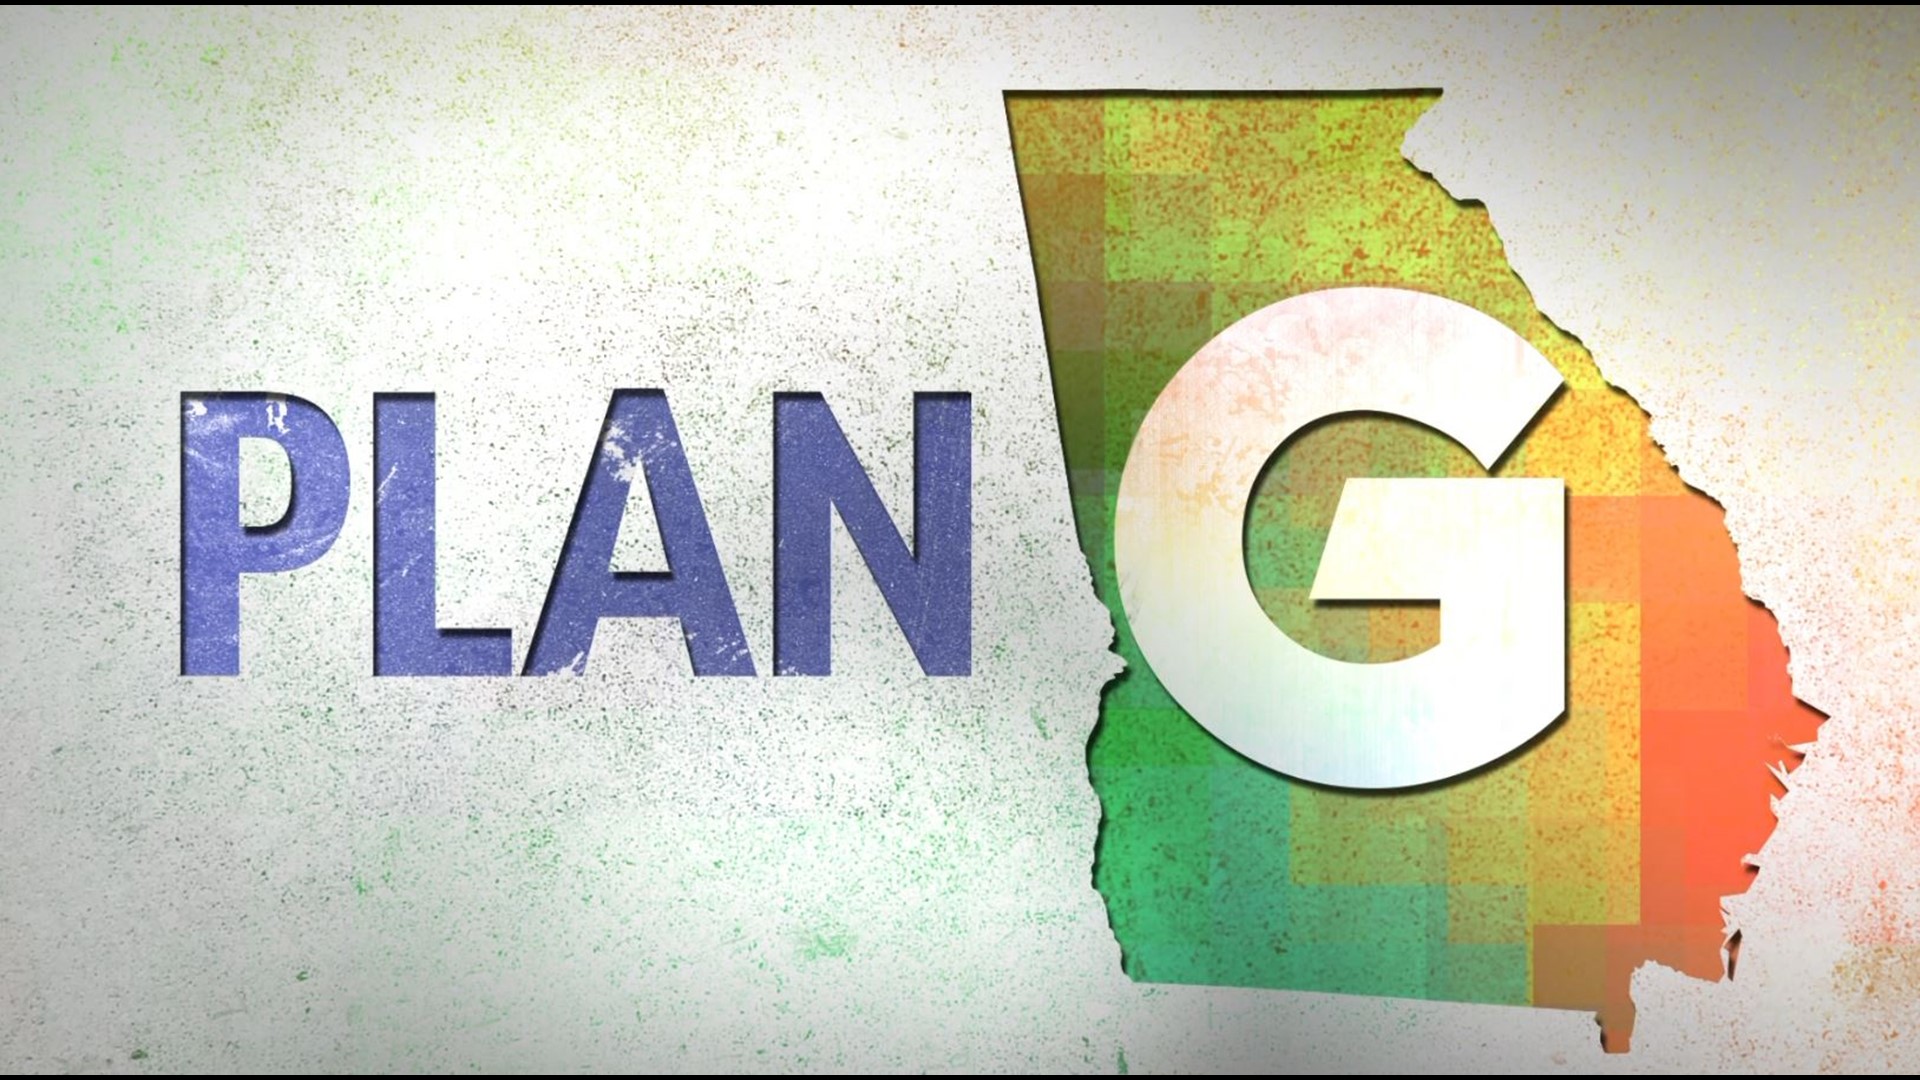 Local news rarely covers climate. We’ve got you covered on the weather. But we don’t talk about climate. It’s too toxic, too politicized. too daunting, too depressing. It doesn’t need to be. Reporter Matt Pearl introduces PLAN G, our special report dedicated to covering the many ways the climate is changing Georgia – and the ways Georgians are responding.